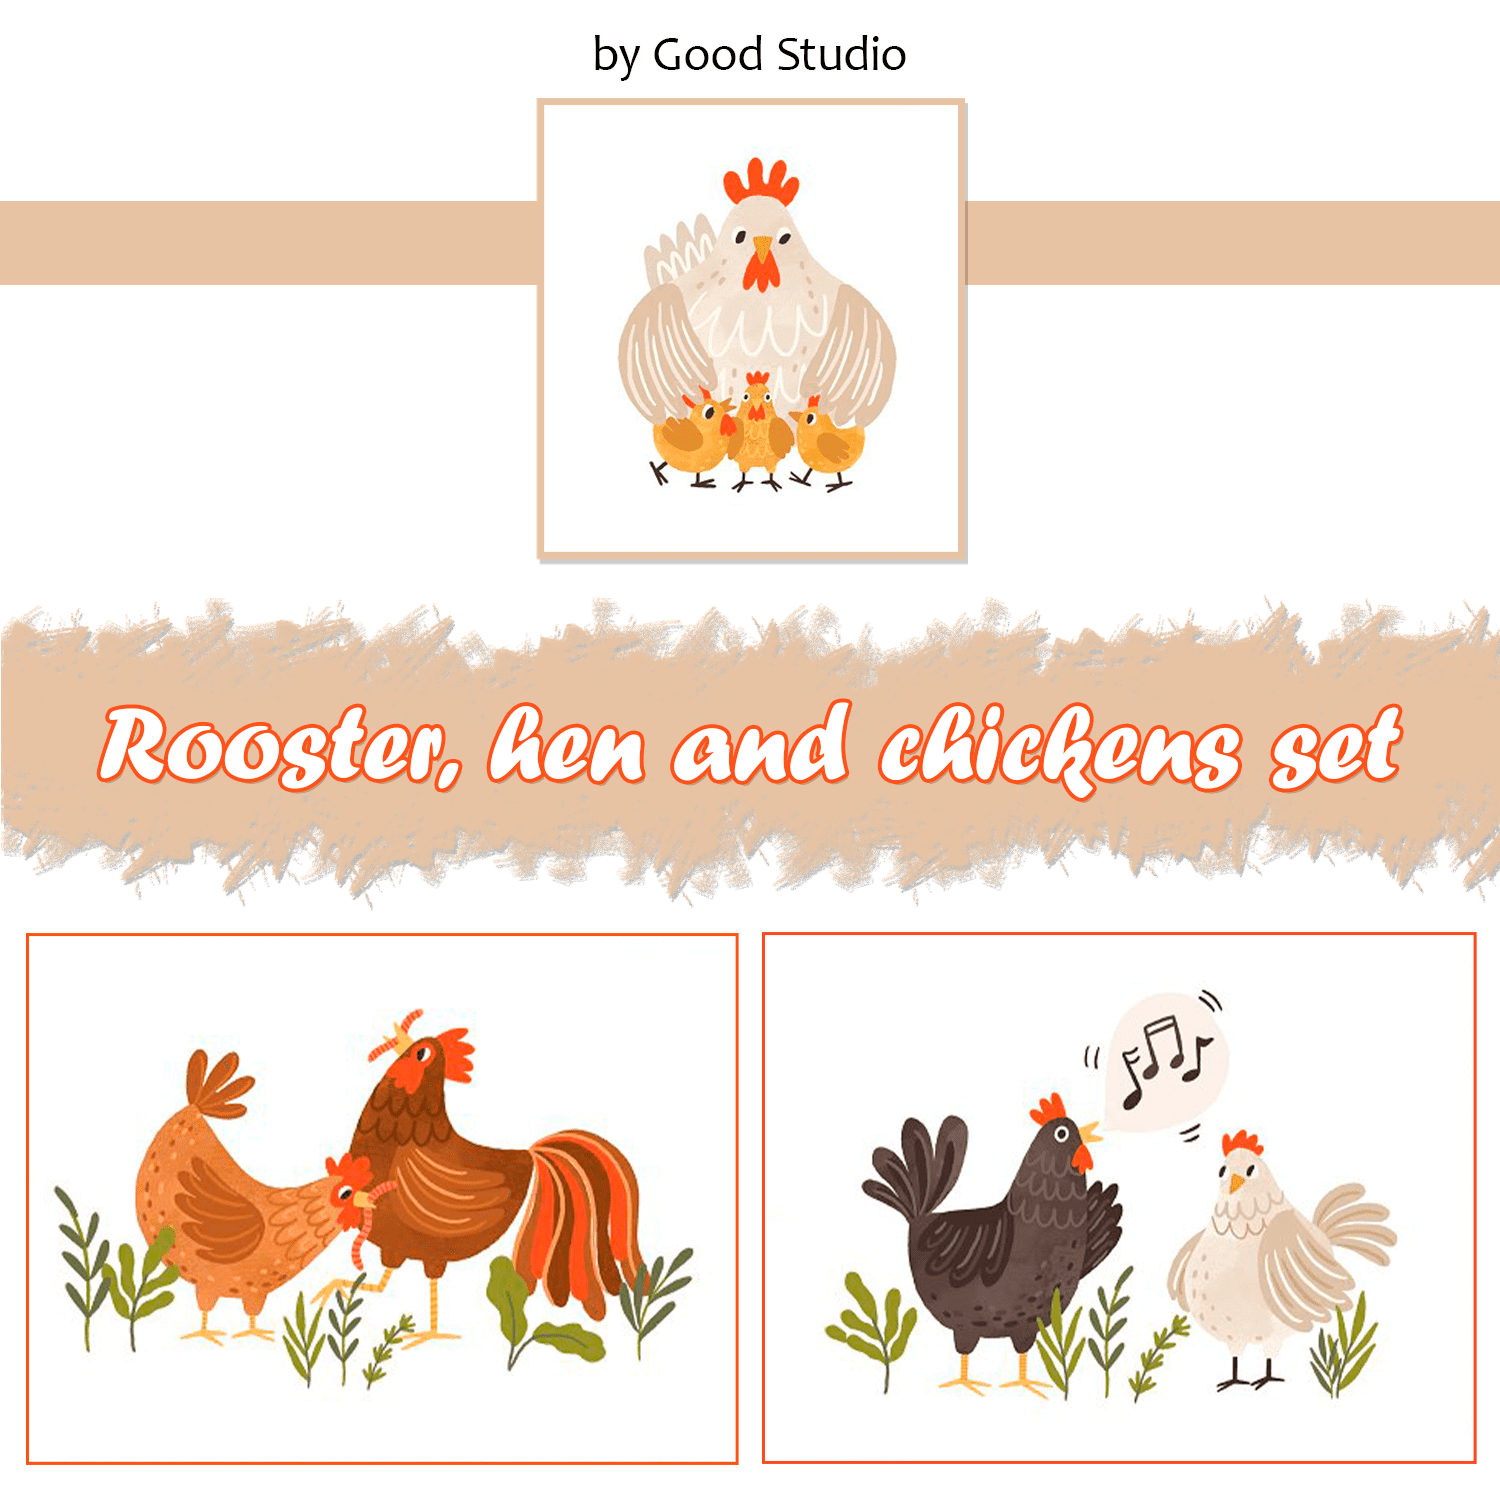 Rooster, hen and chickens set cover.